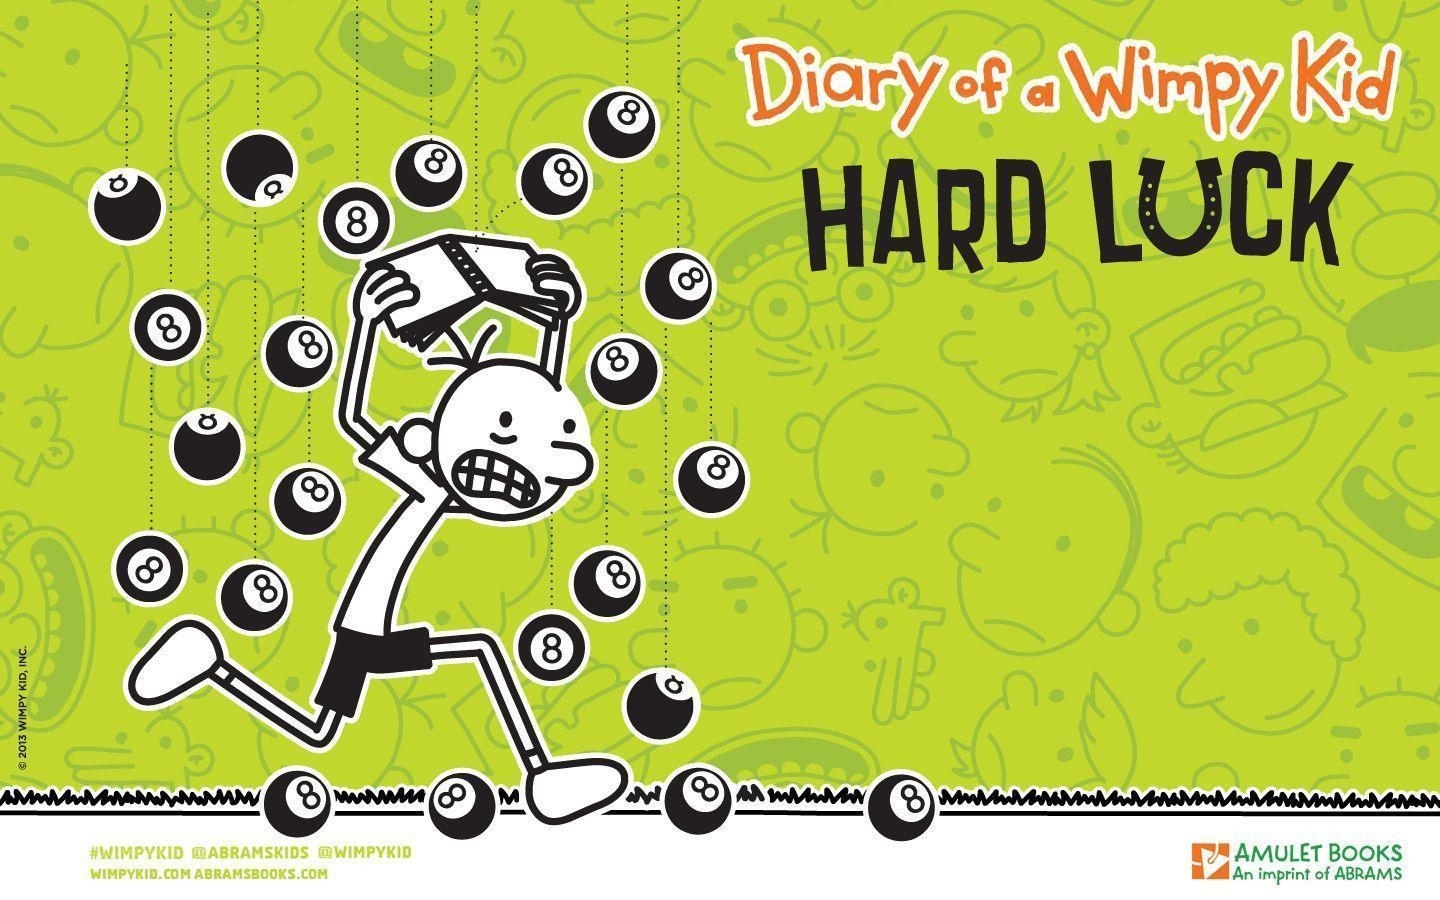 10 Top Diary Of A Wimpy Kid Wallpaper FULL HD 1080p For PC Background